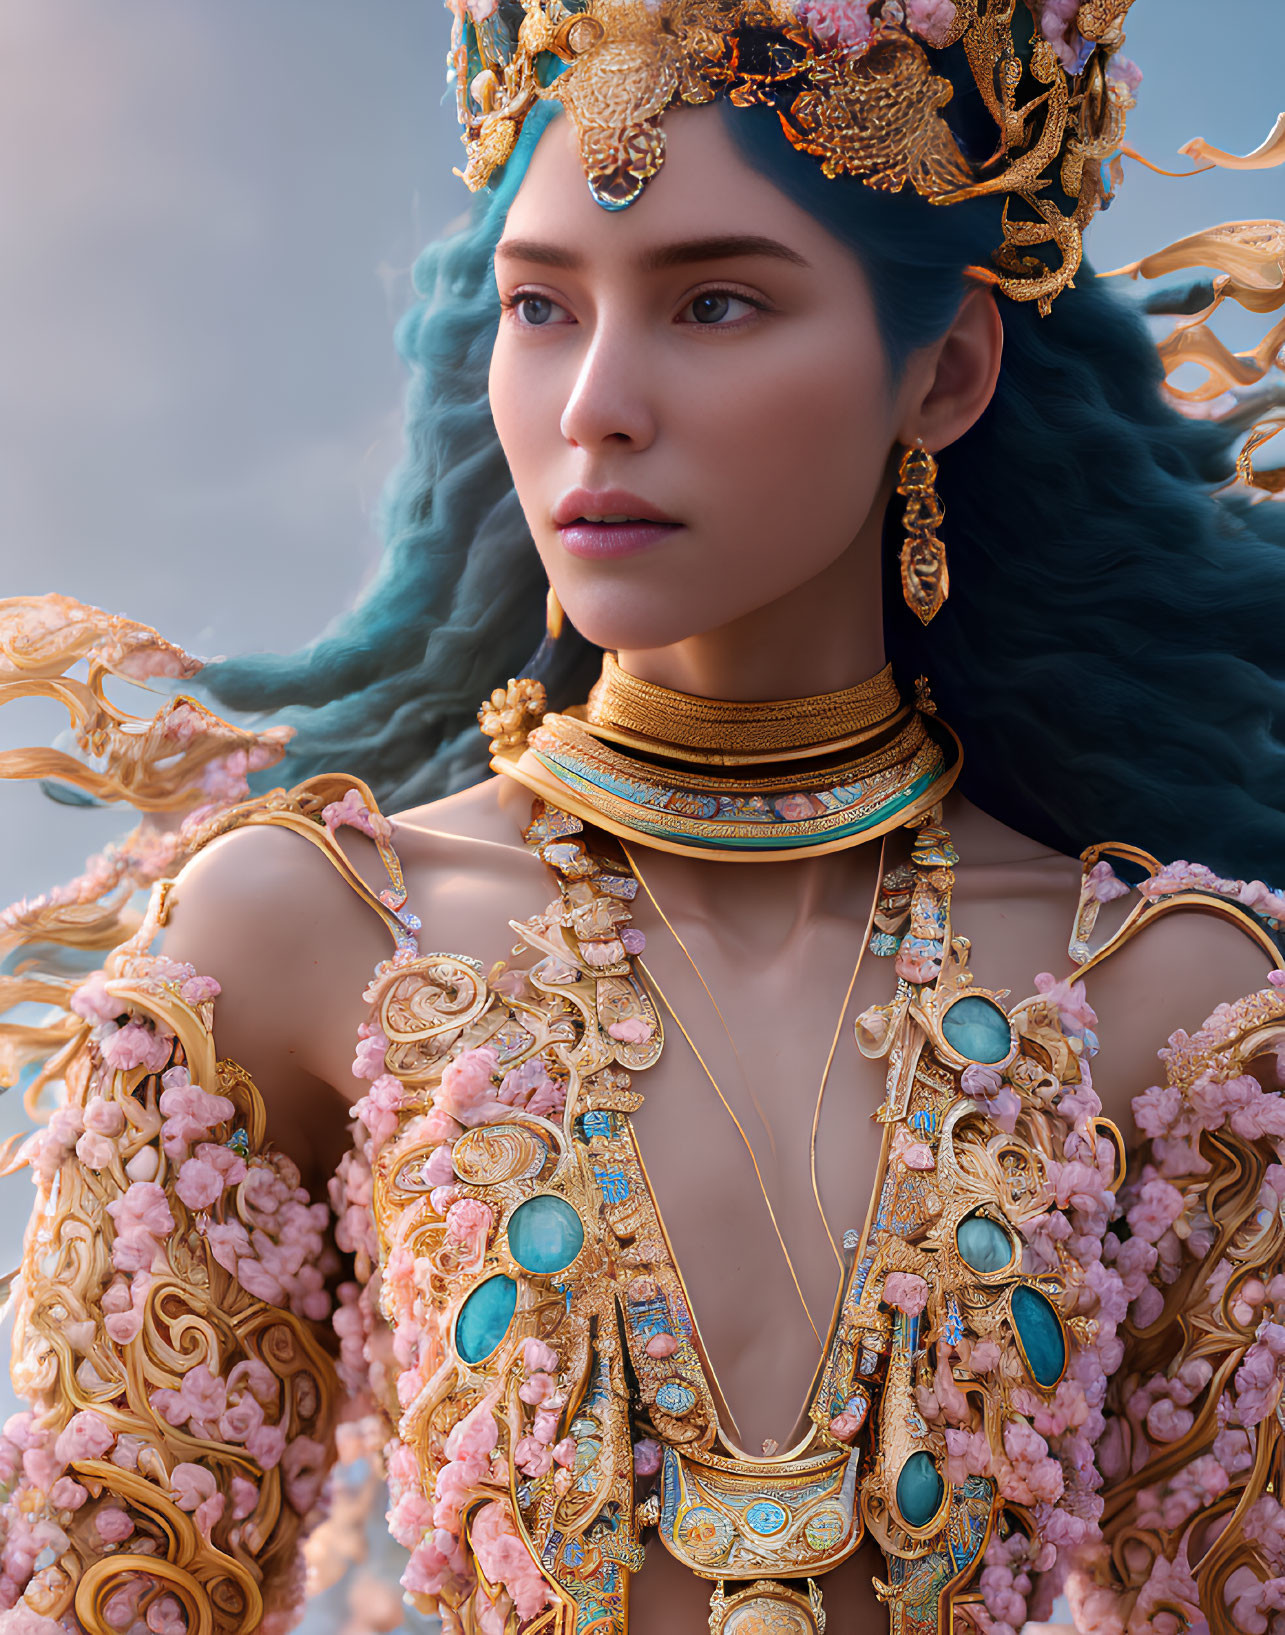 Regal woman with blue hair in ornate gold crown and jewelry against soft sky backdrop